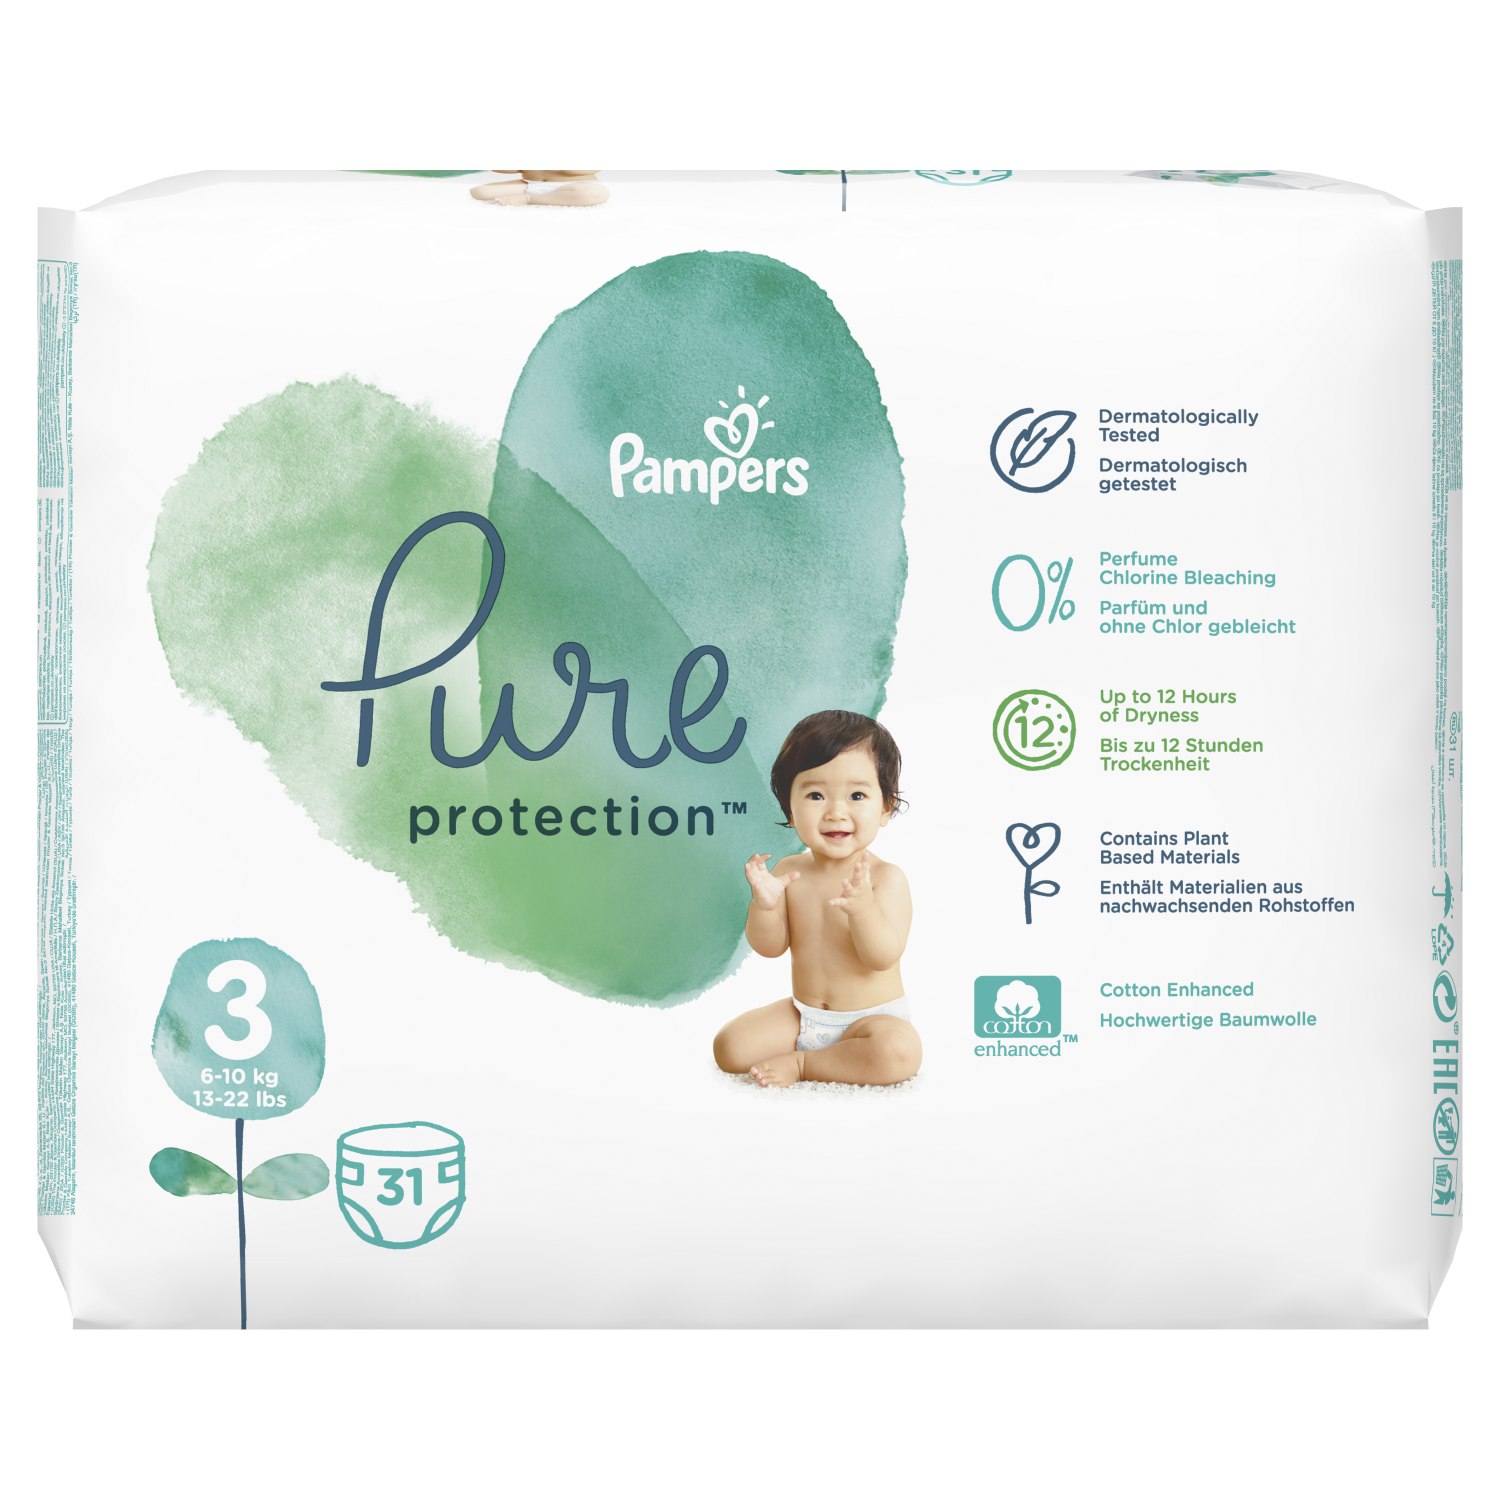 pampers pure protection 6